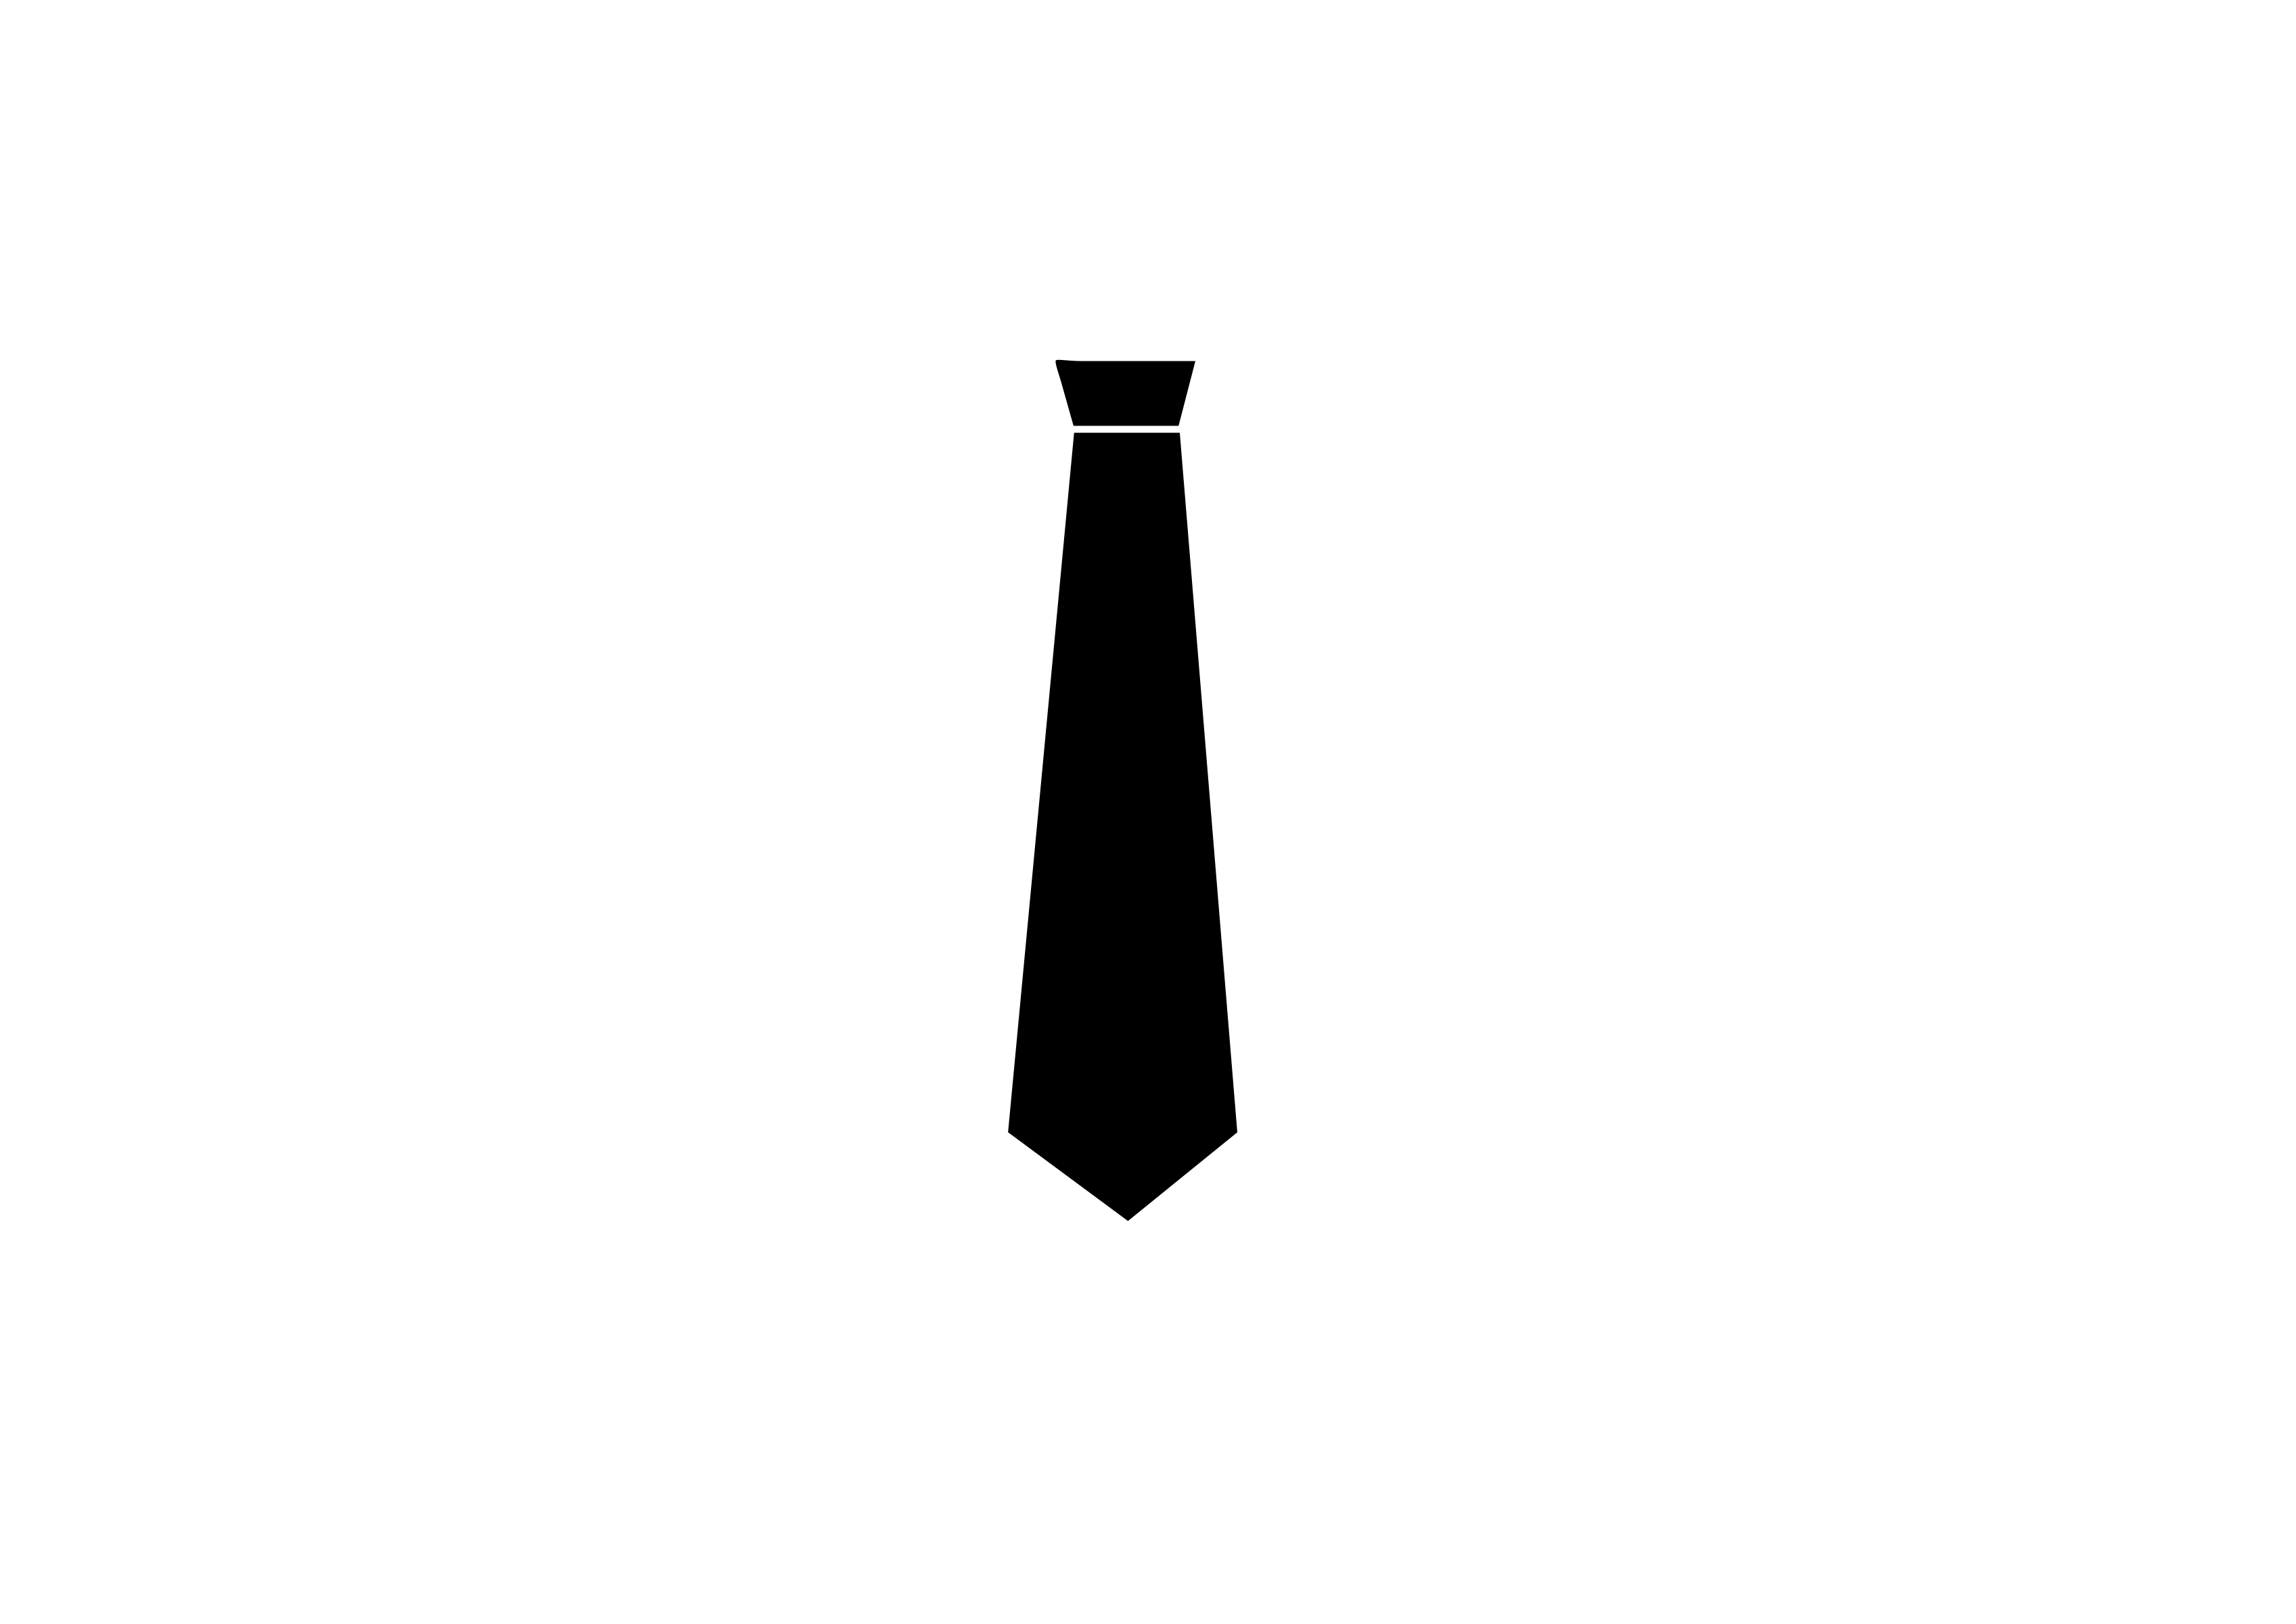 clipart tie black and white - photo #11